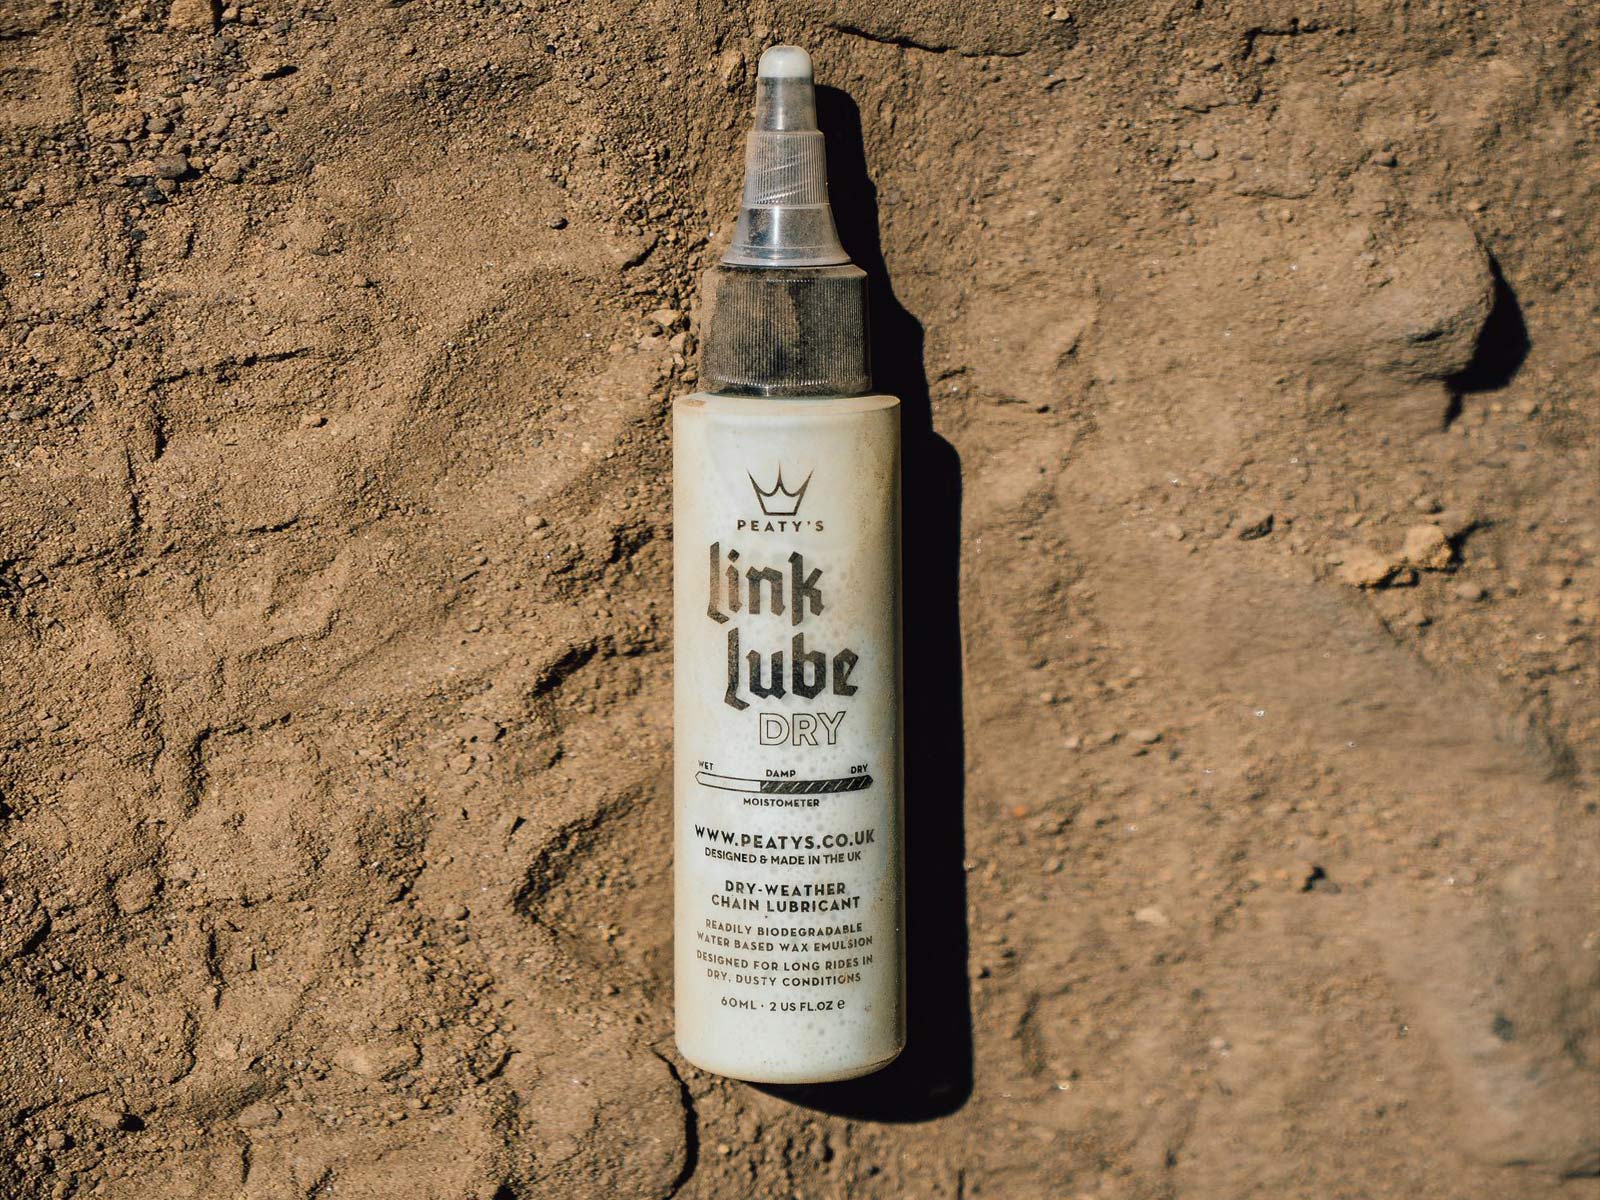 Peaty's Link Lube Dry_wax and water based dry conditions chainlube_